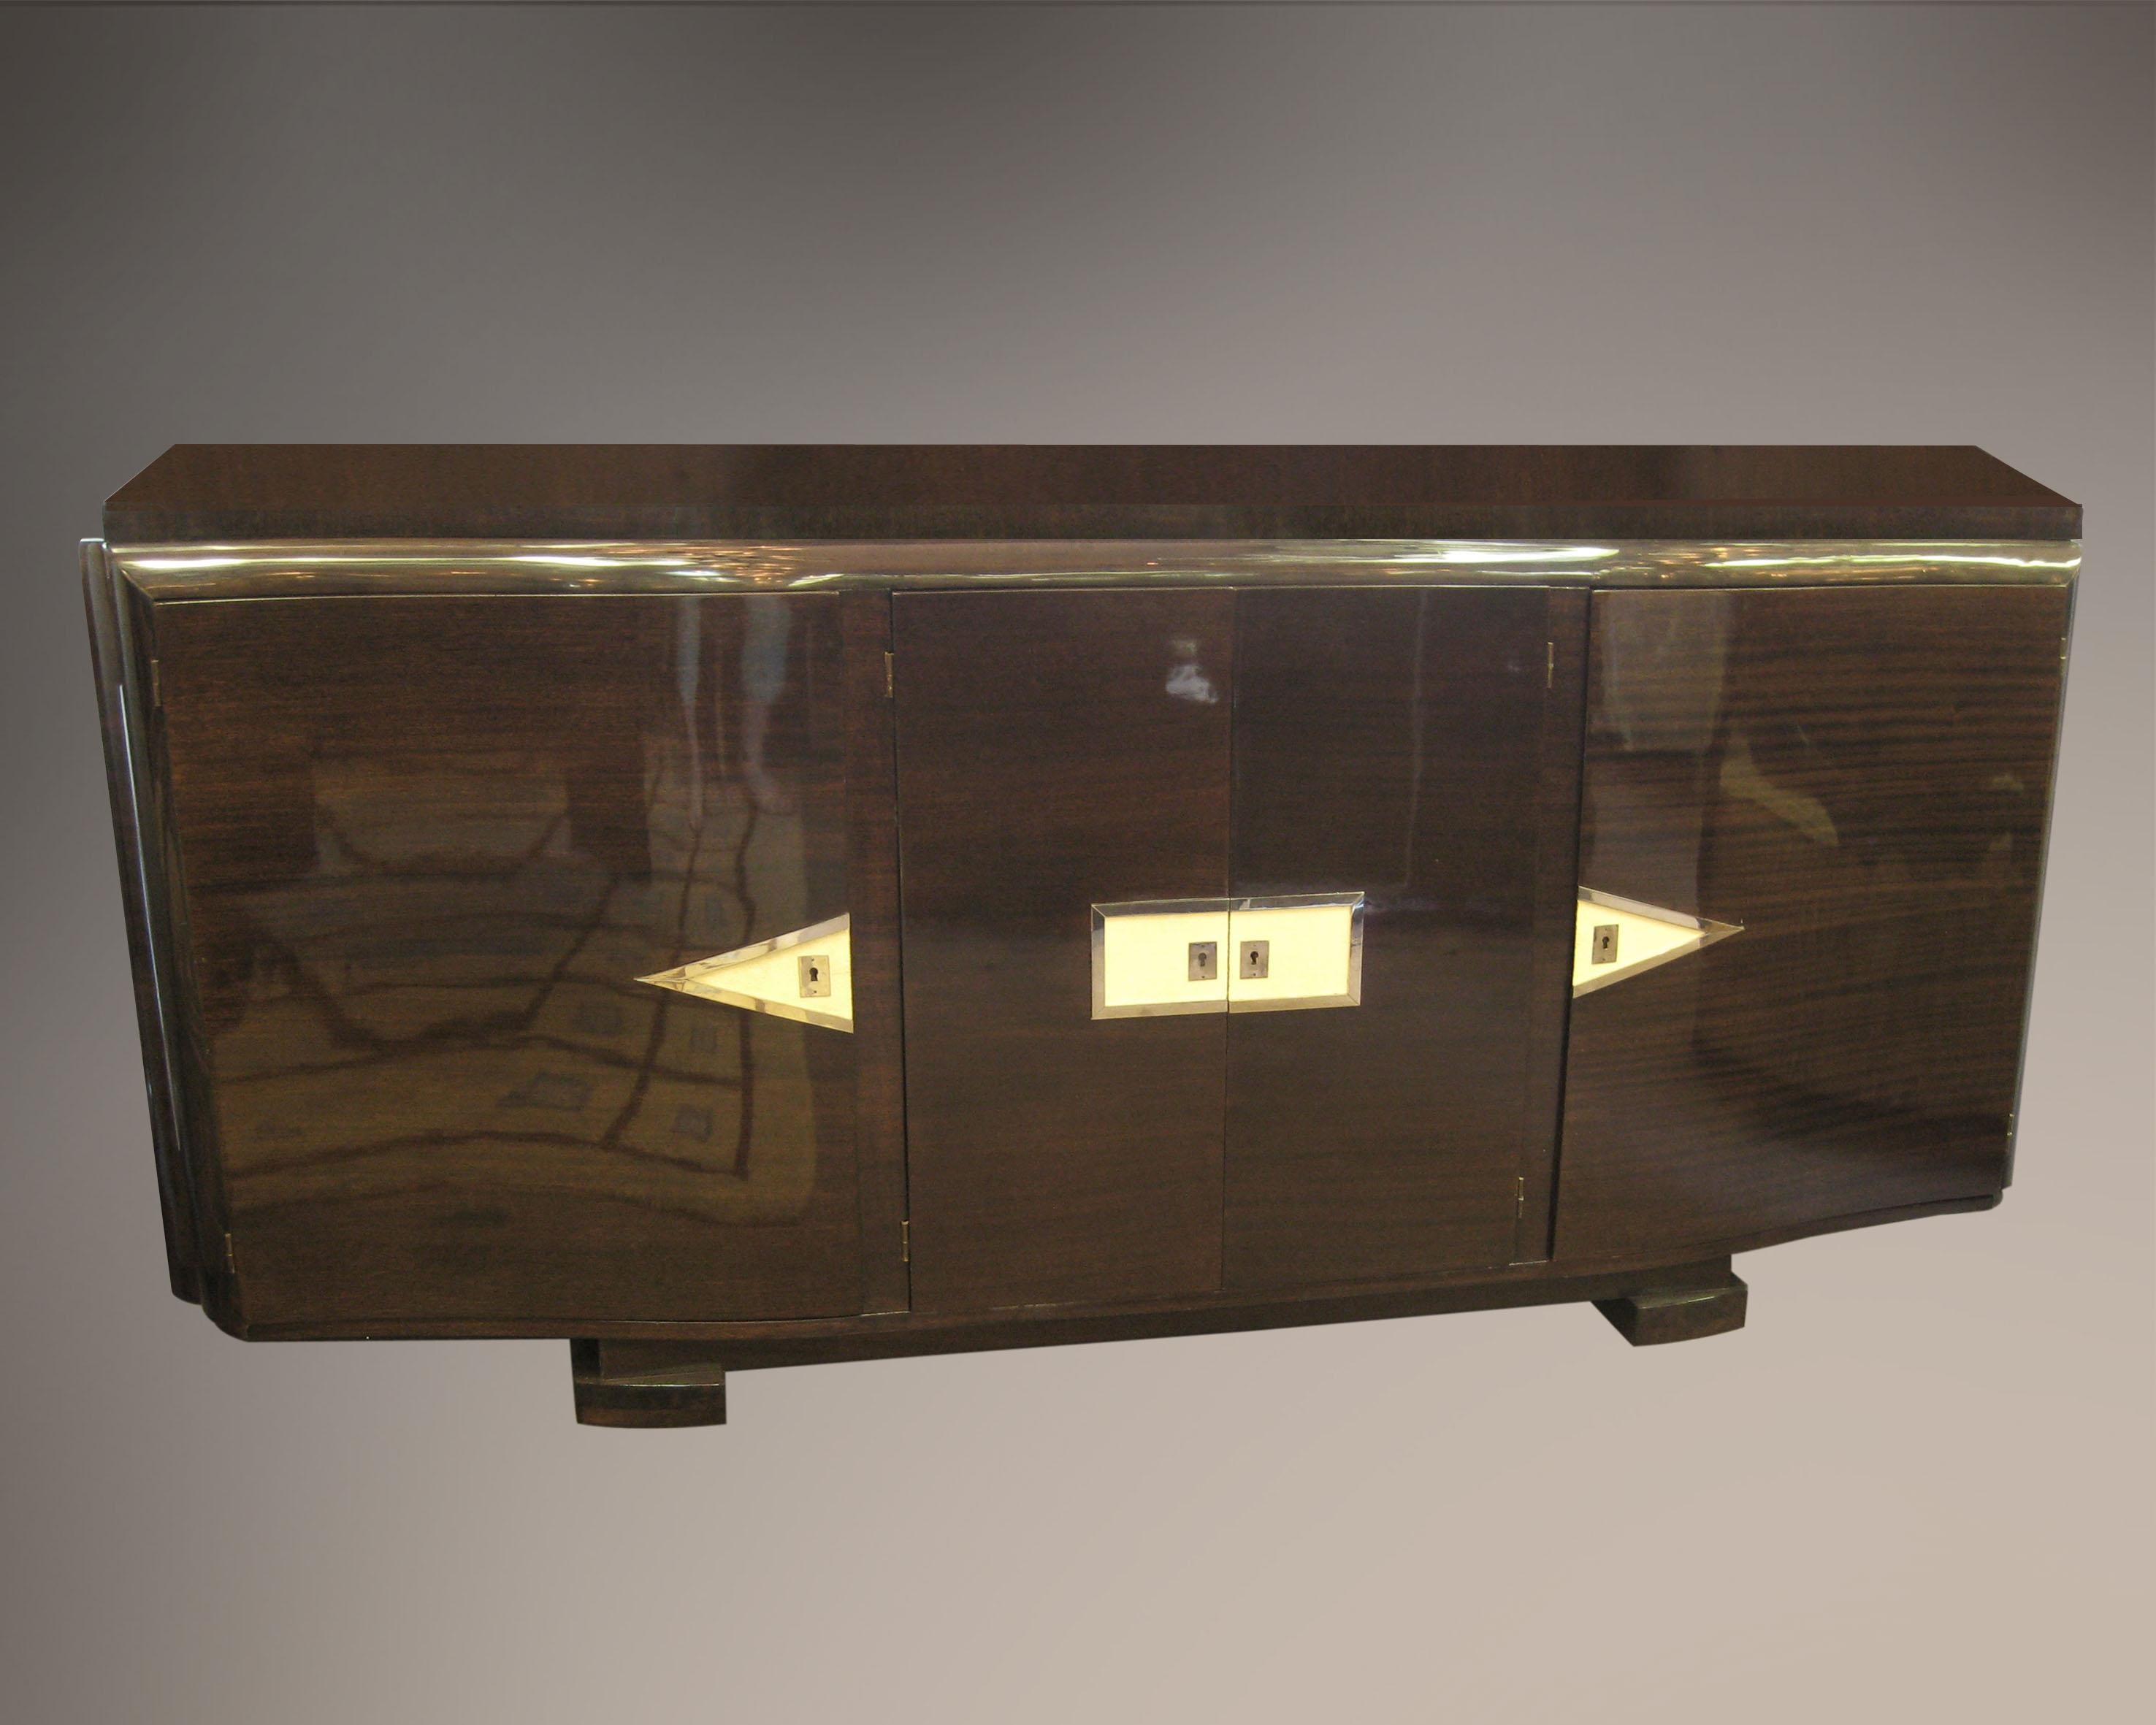 Modernist dramatic bow front credenza attributed to Andre Frechet, with a horizontal frieze of diamond and rectangular shapes inlaid in shagreen.
Thin nickel plated bronze framing delineates the rectangular sharkskin decorative detail on the